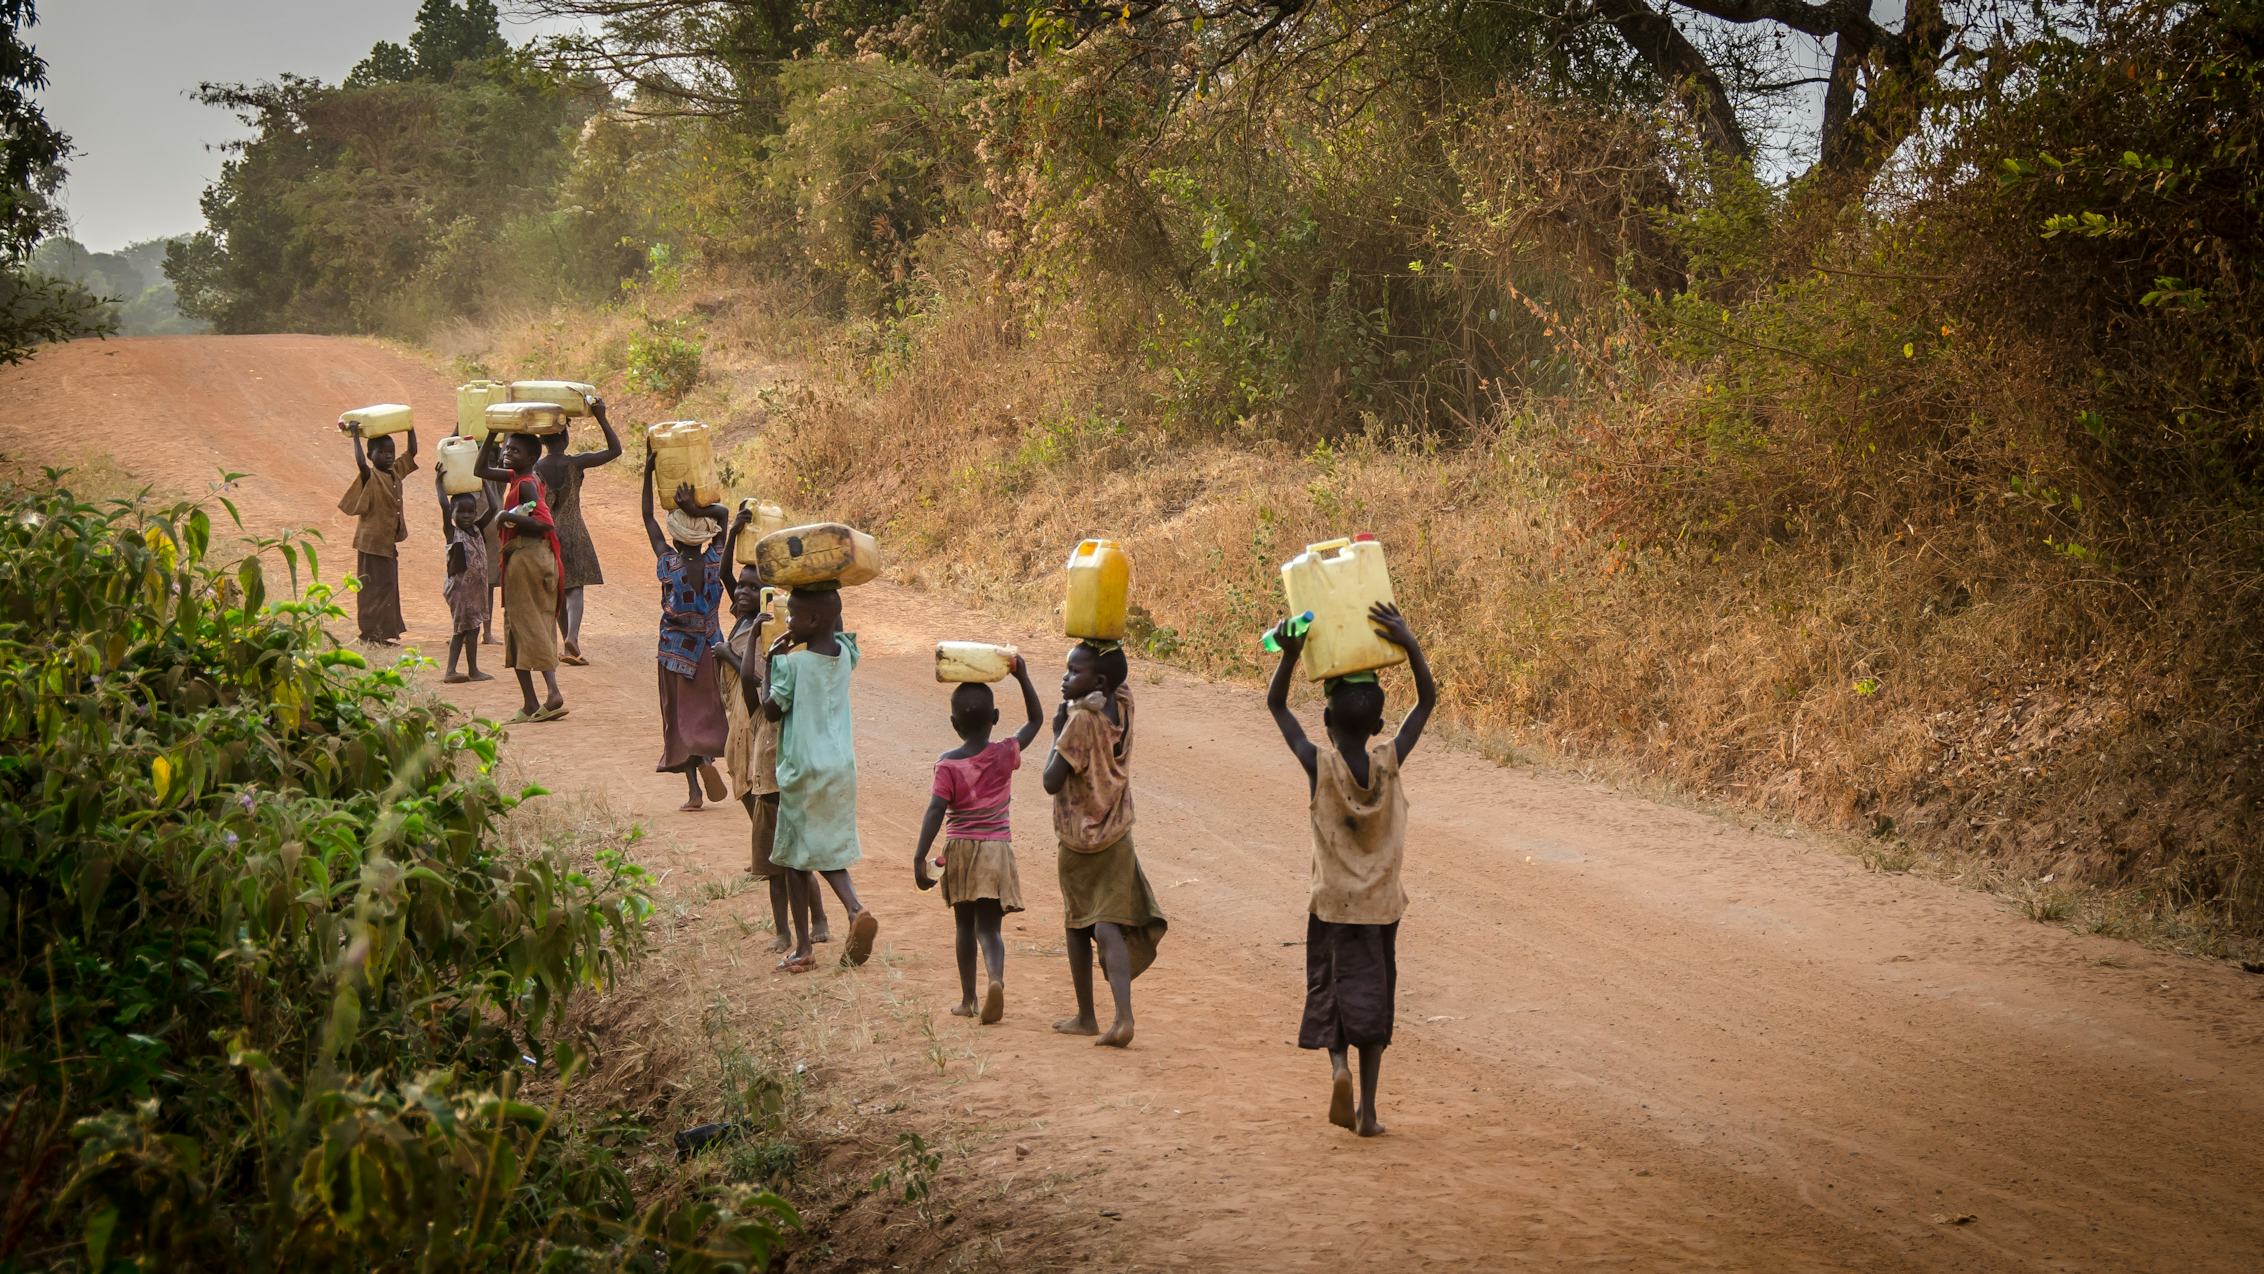 People travelling a distance to collect water in areas struck with water shortages (Image source: Unsplash)